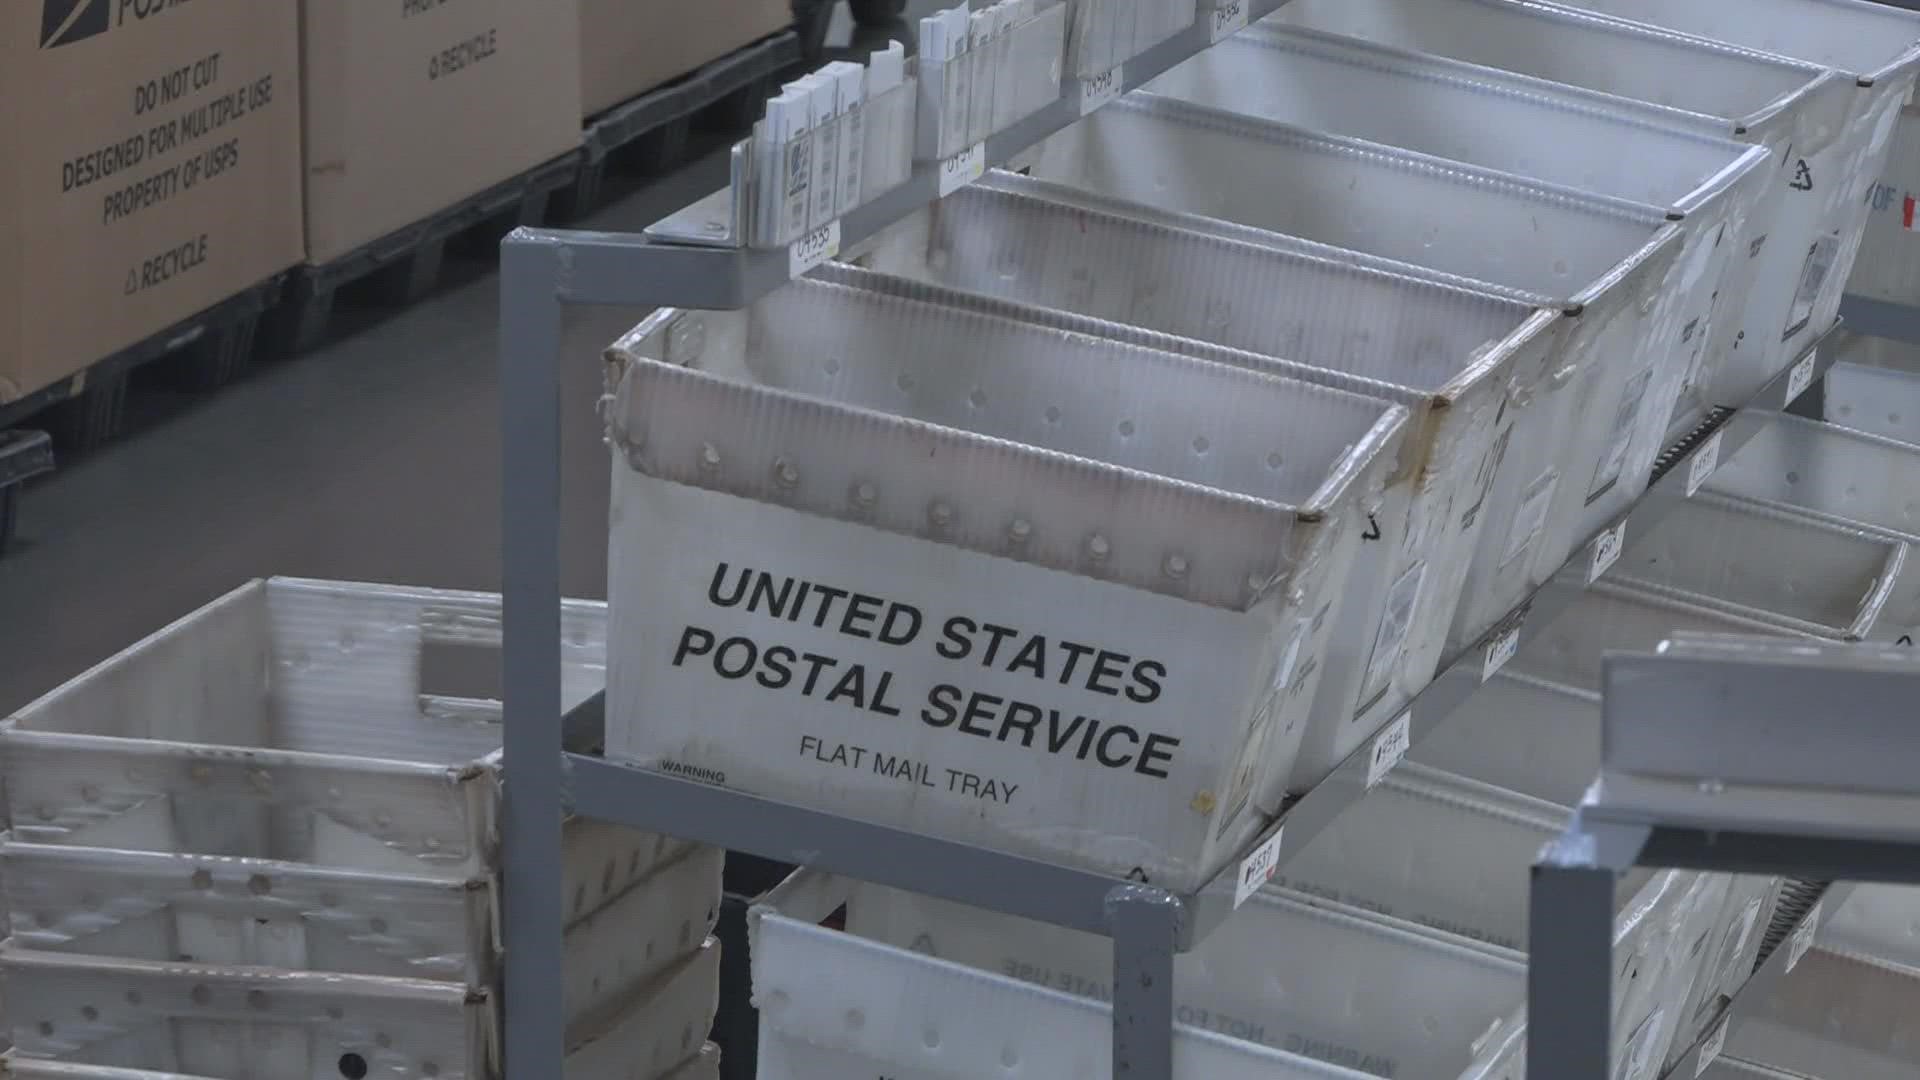 Maine's members of Congress are putting pressure on the United States Postal Service.